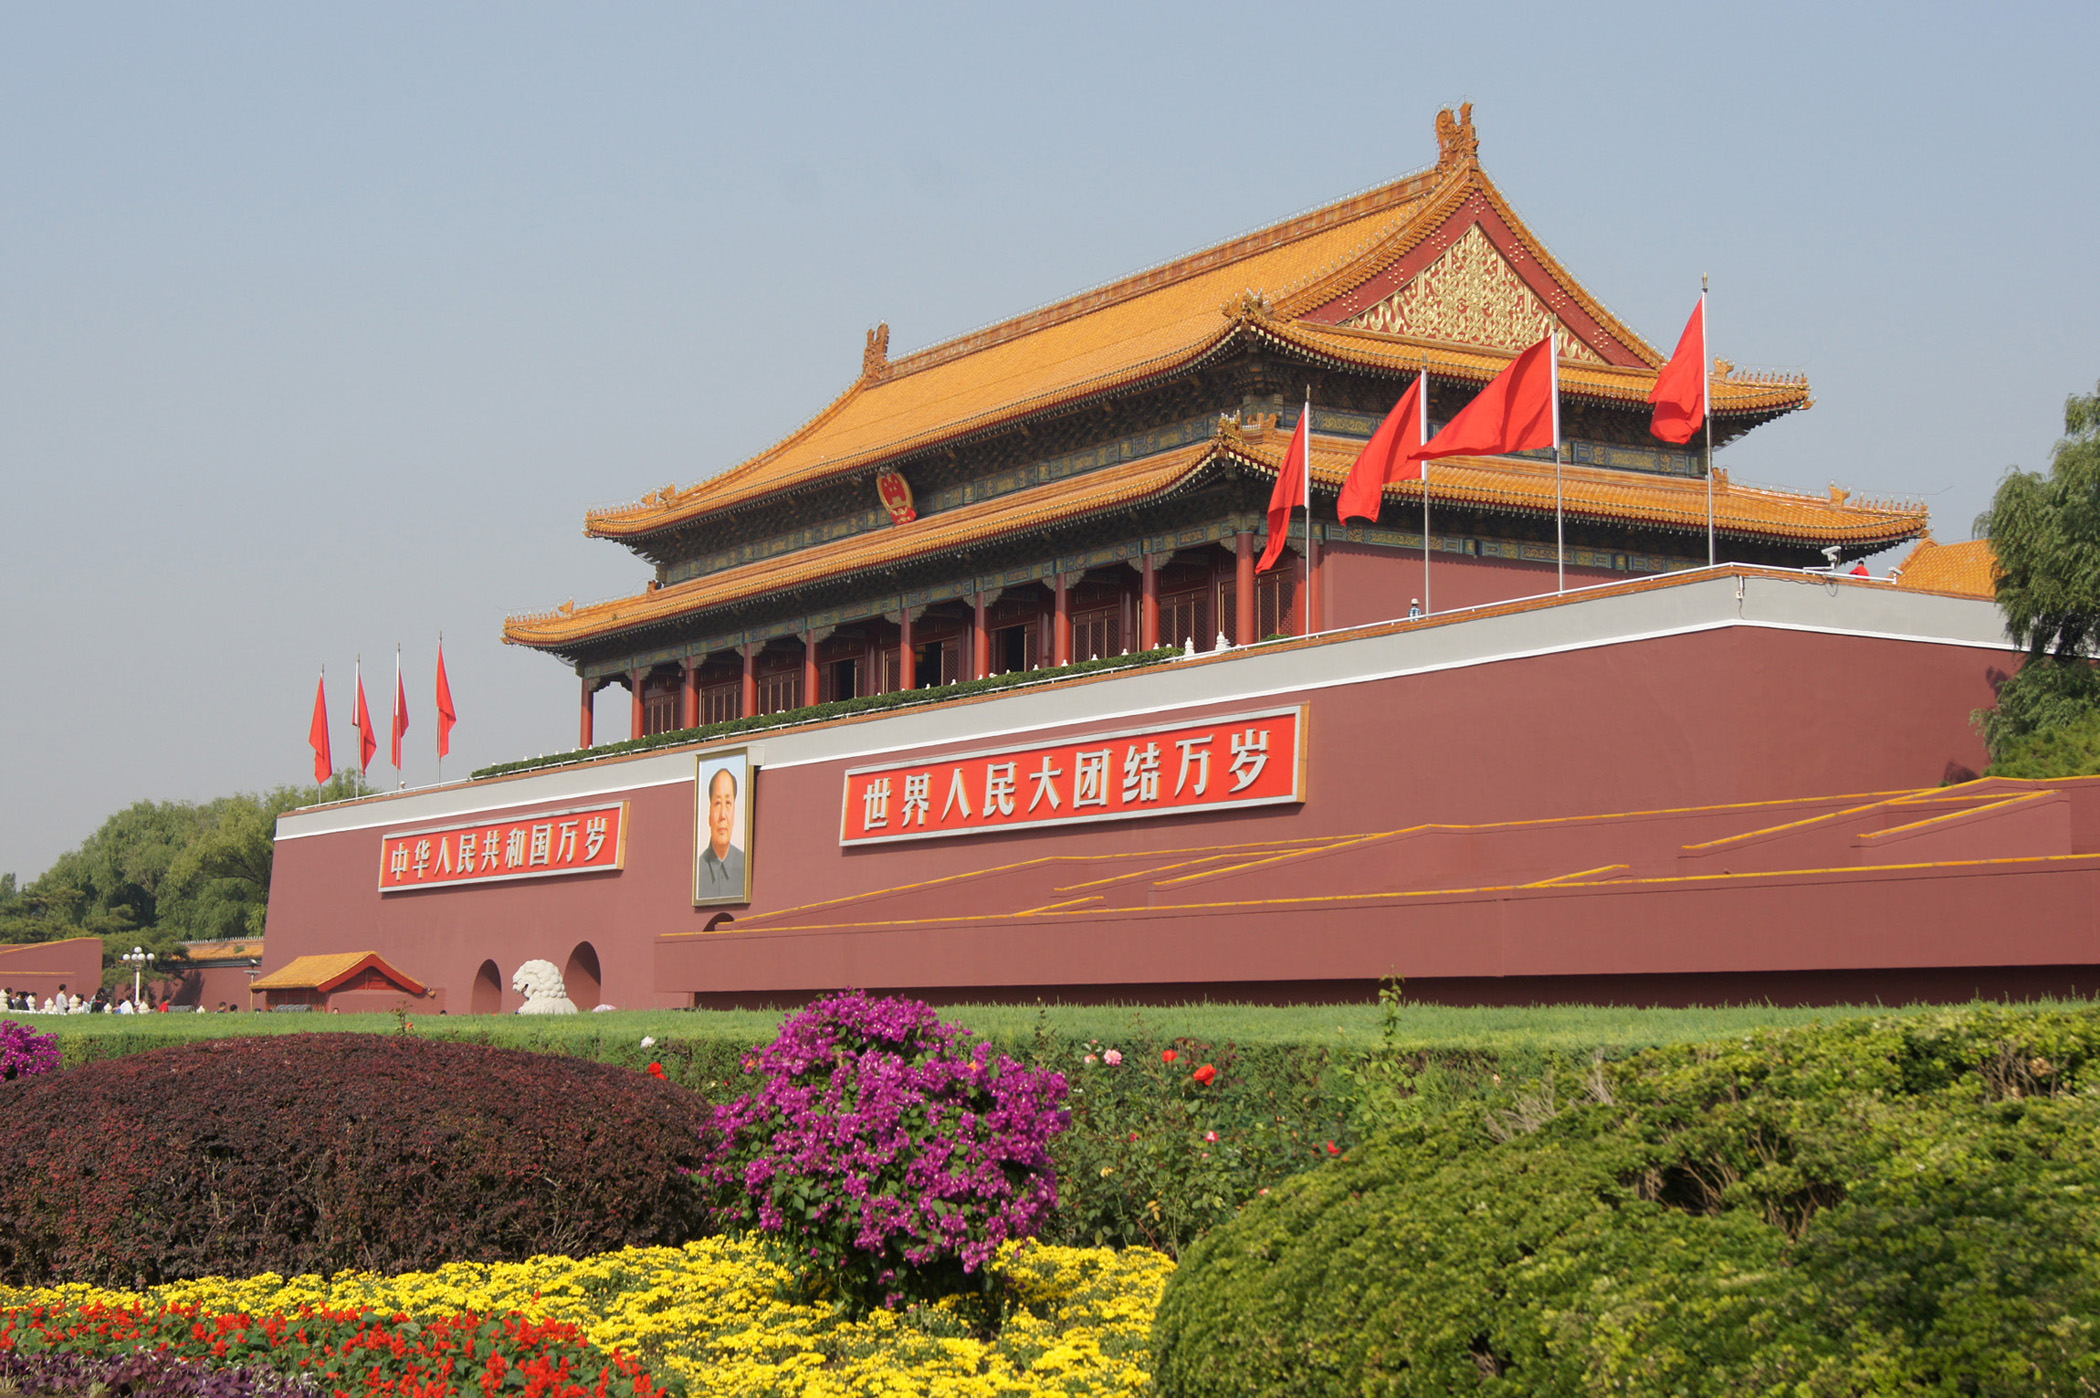 Tiananmen Square A Large Square in Beijing, China | Travel Featured